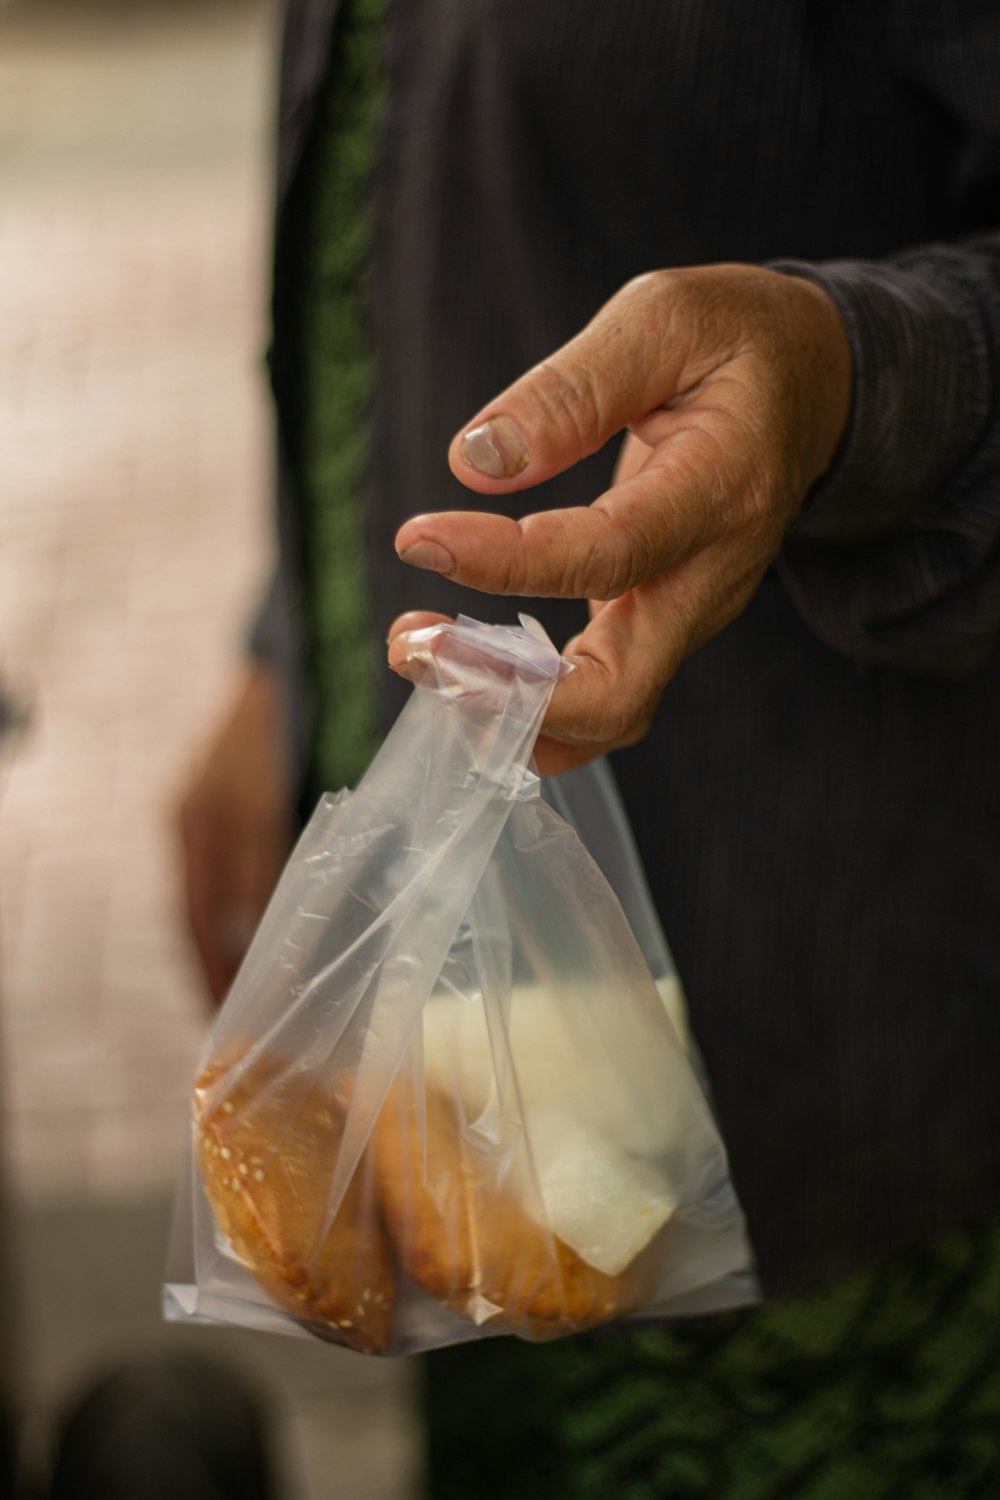 a person holding a bag of food in their hand